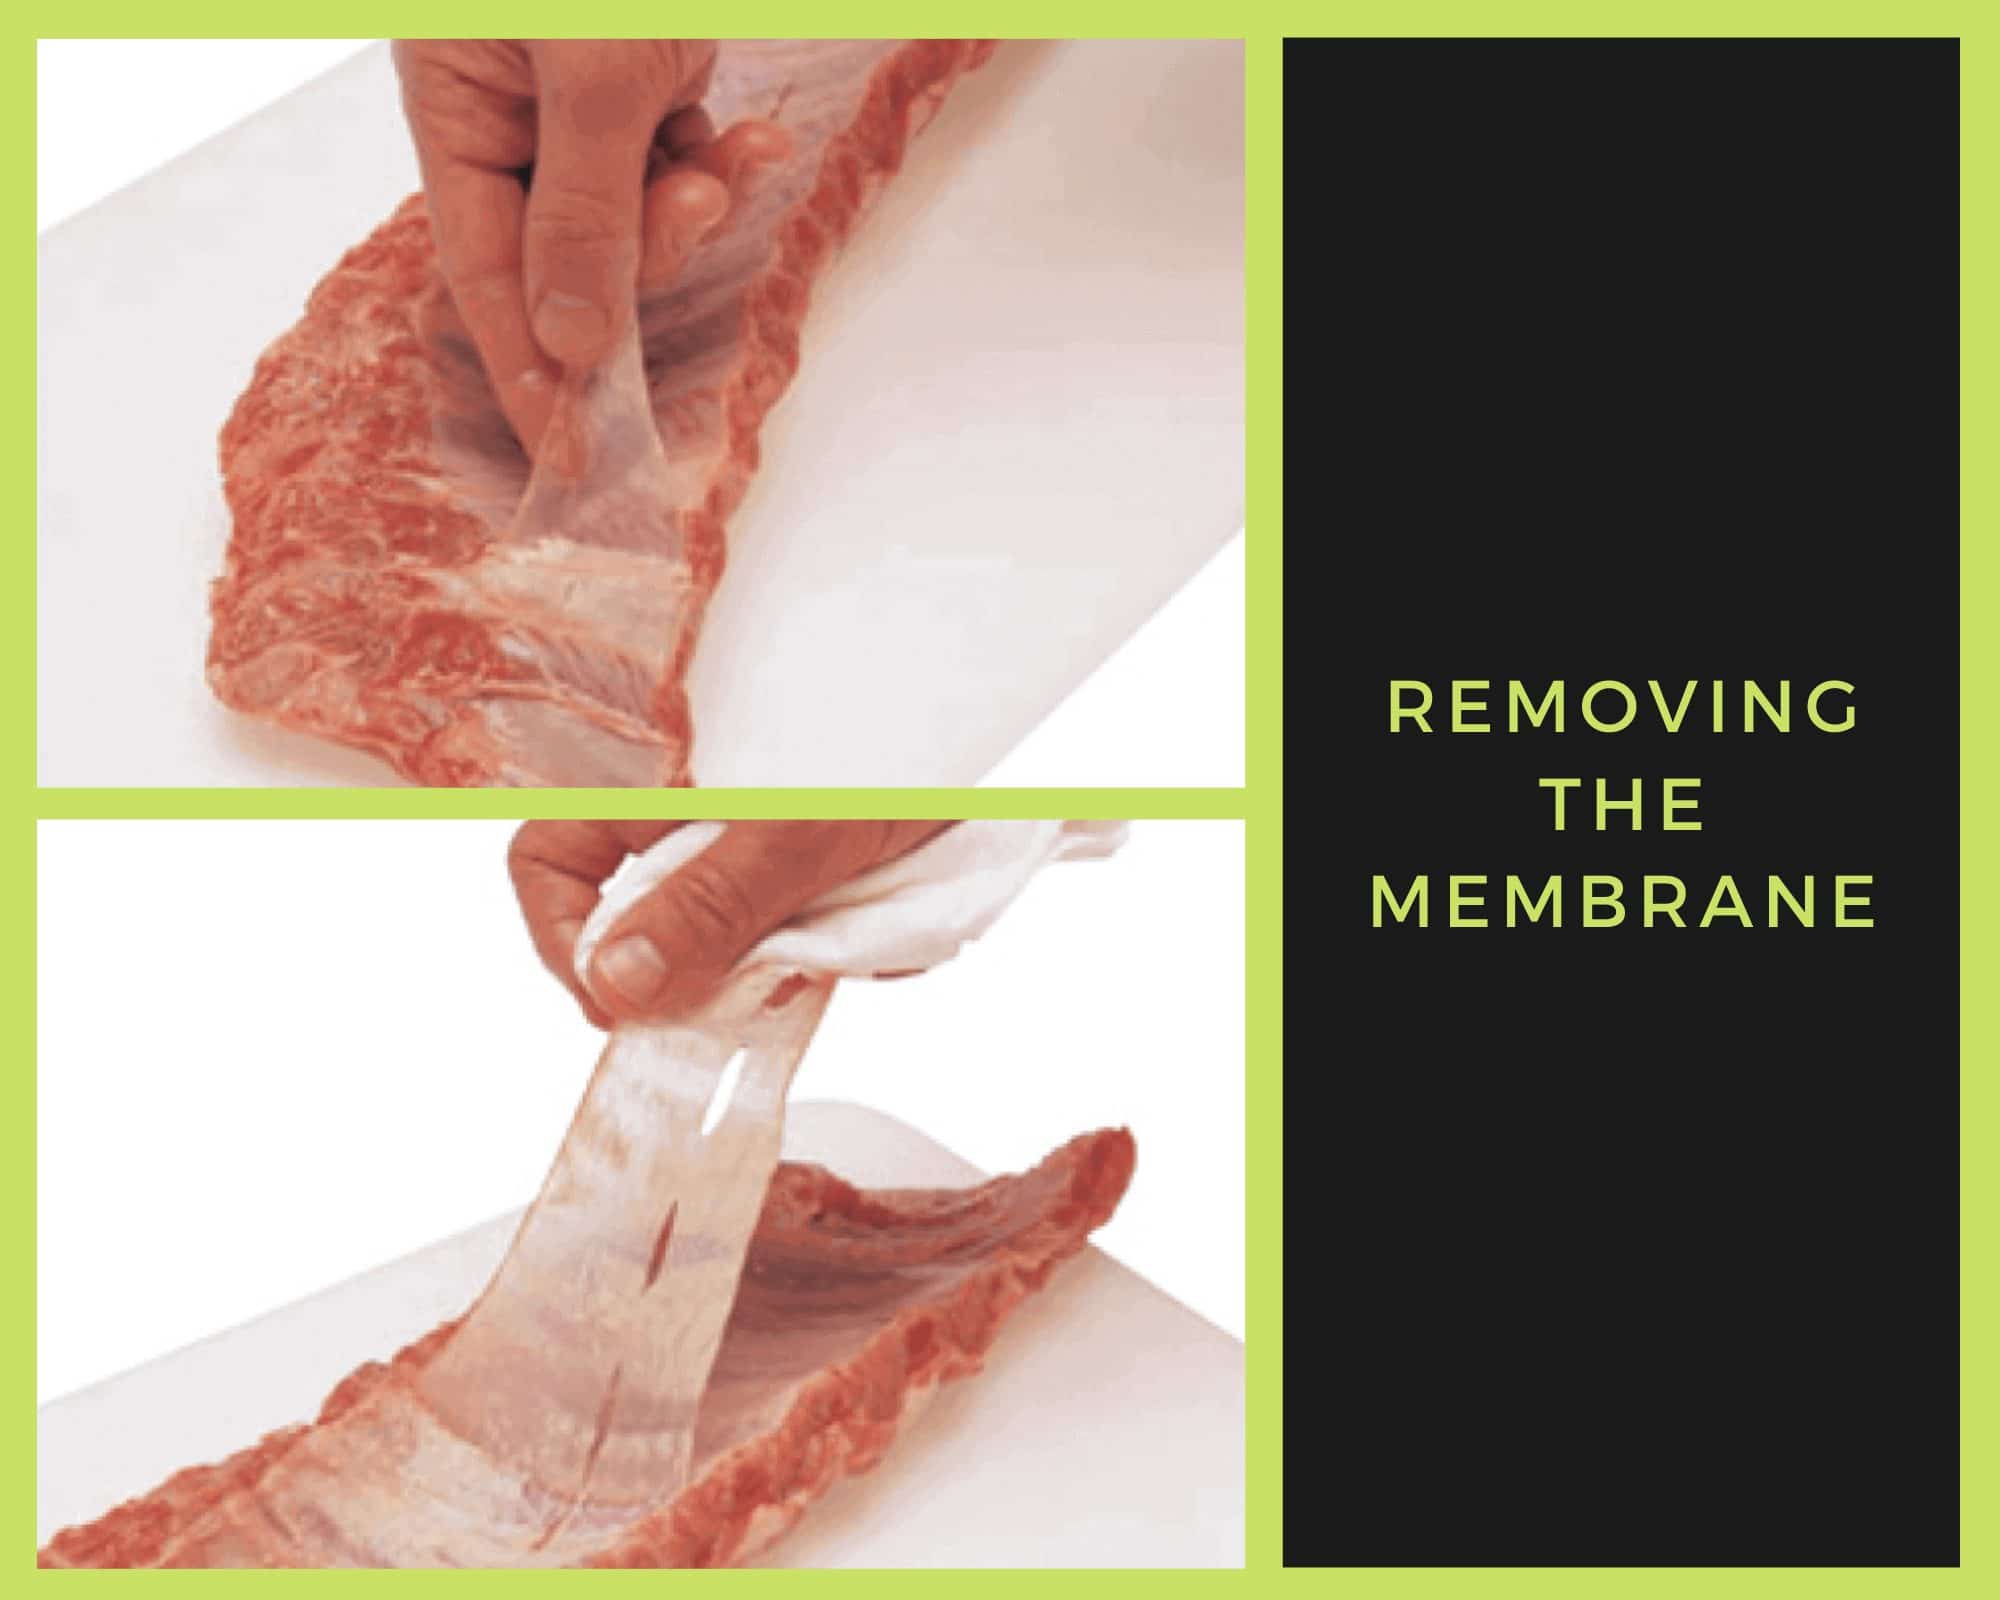 the technic of trimming and removing the membrane from the ribs